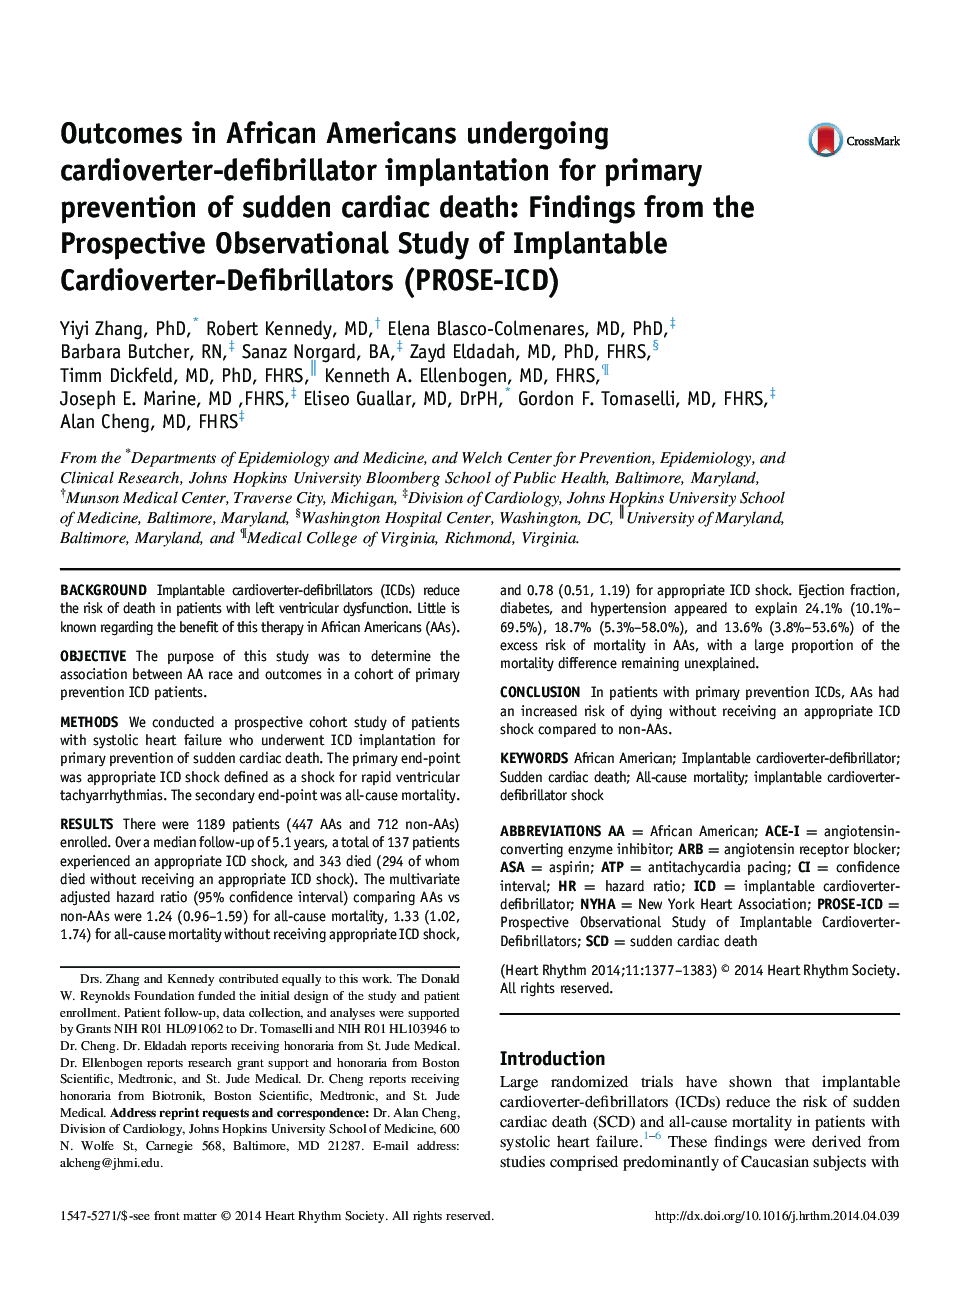 Outcomes in African Americans undergoing cardioverter-defibrillator implantation for primary prevention of sudden cardiac death: Findings from the Prospective Observational Study of Implantable Cardioverter-Defibrillators (PROSE-ICD) 